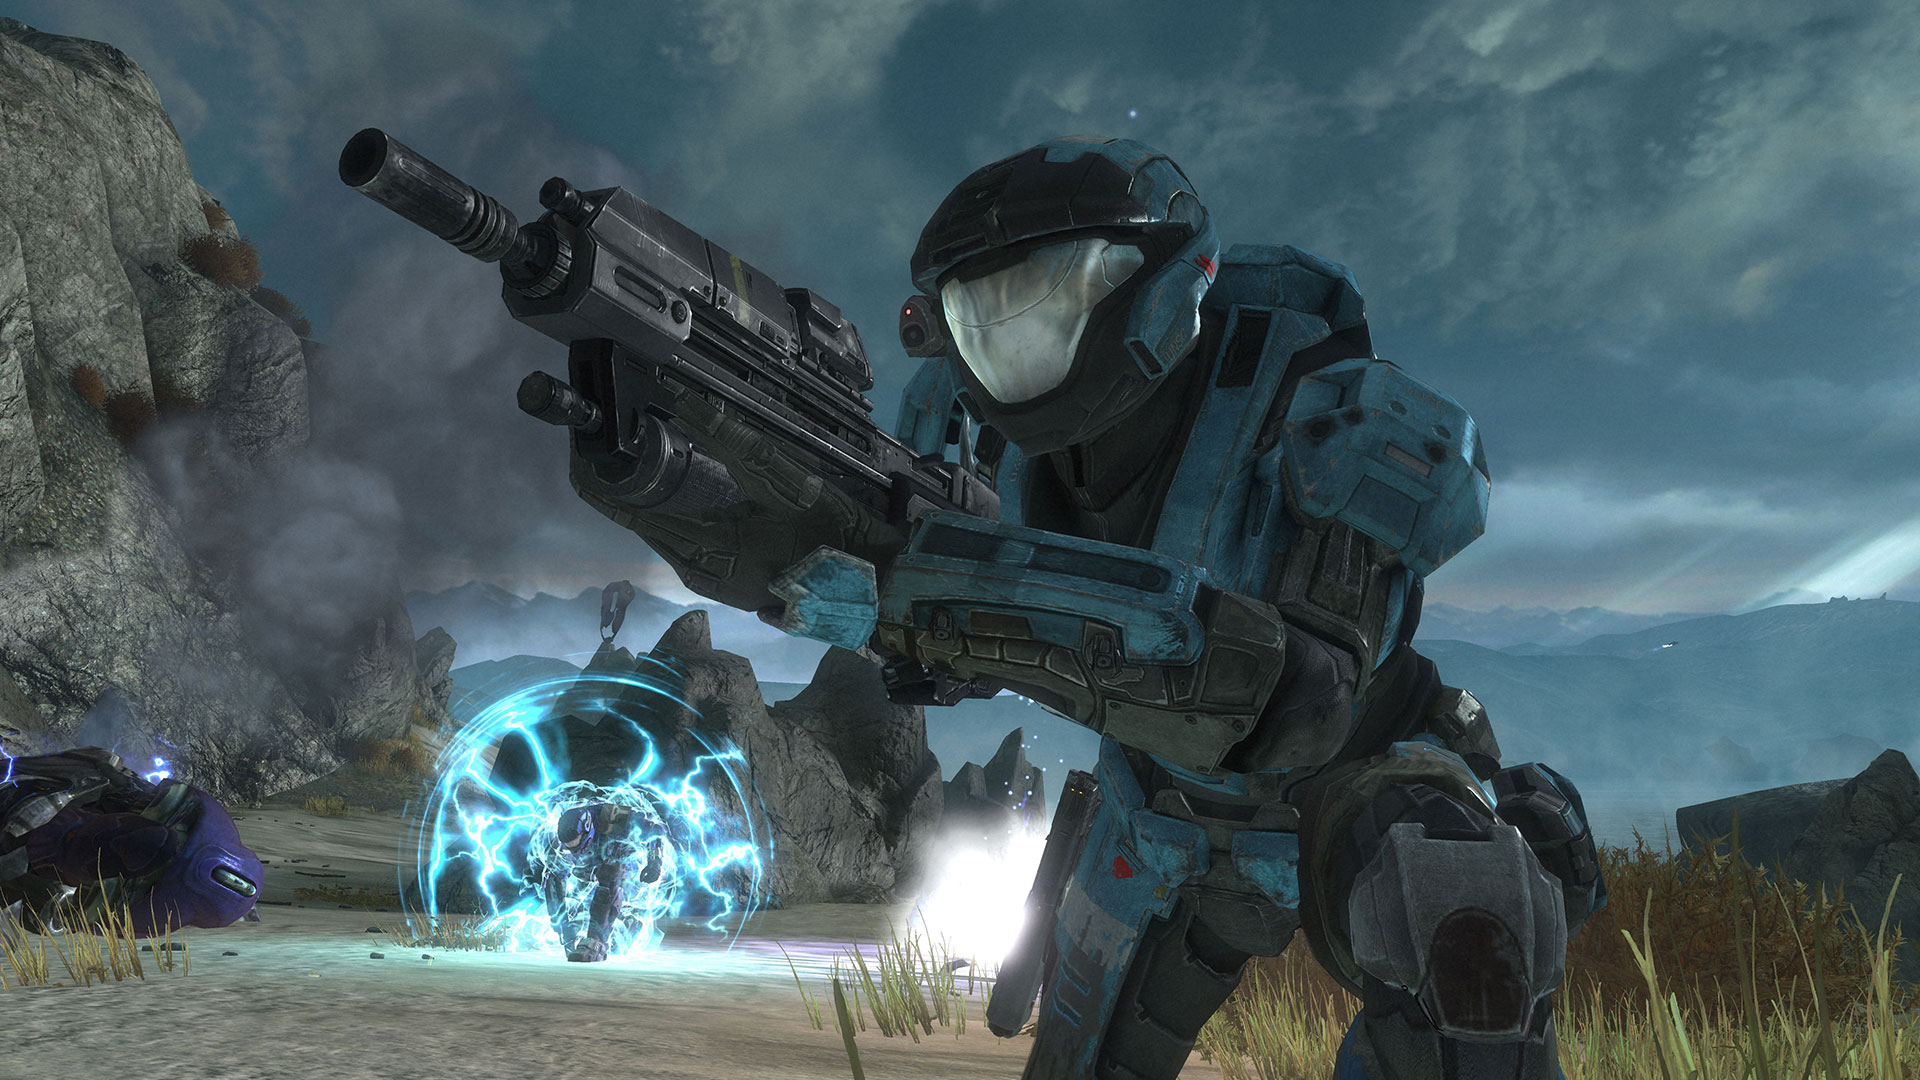 HQ Halo: Reach Wallpapers | File 394.47Kb